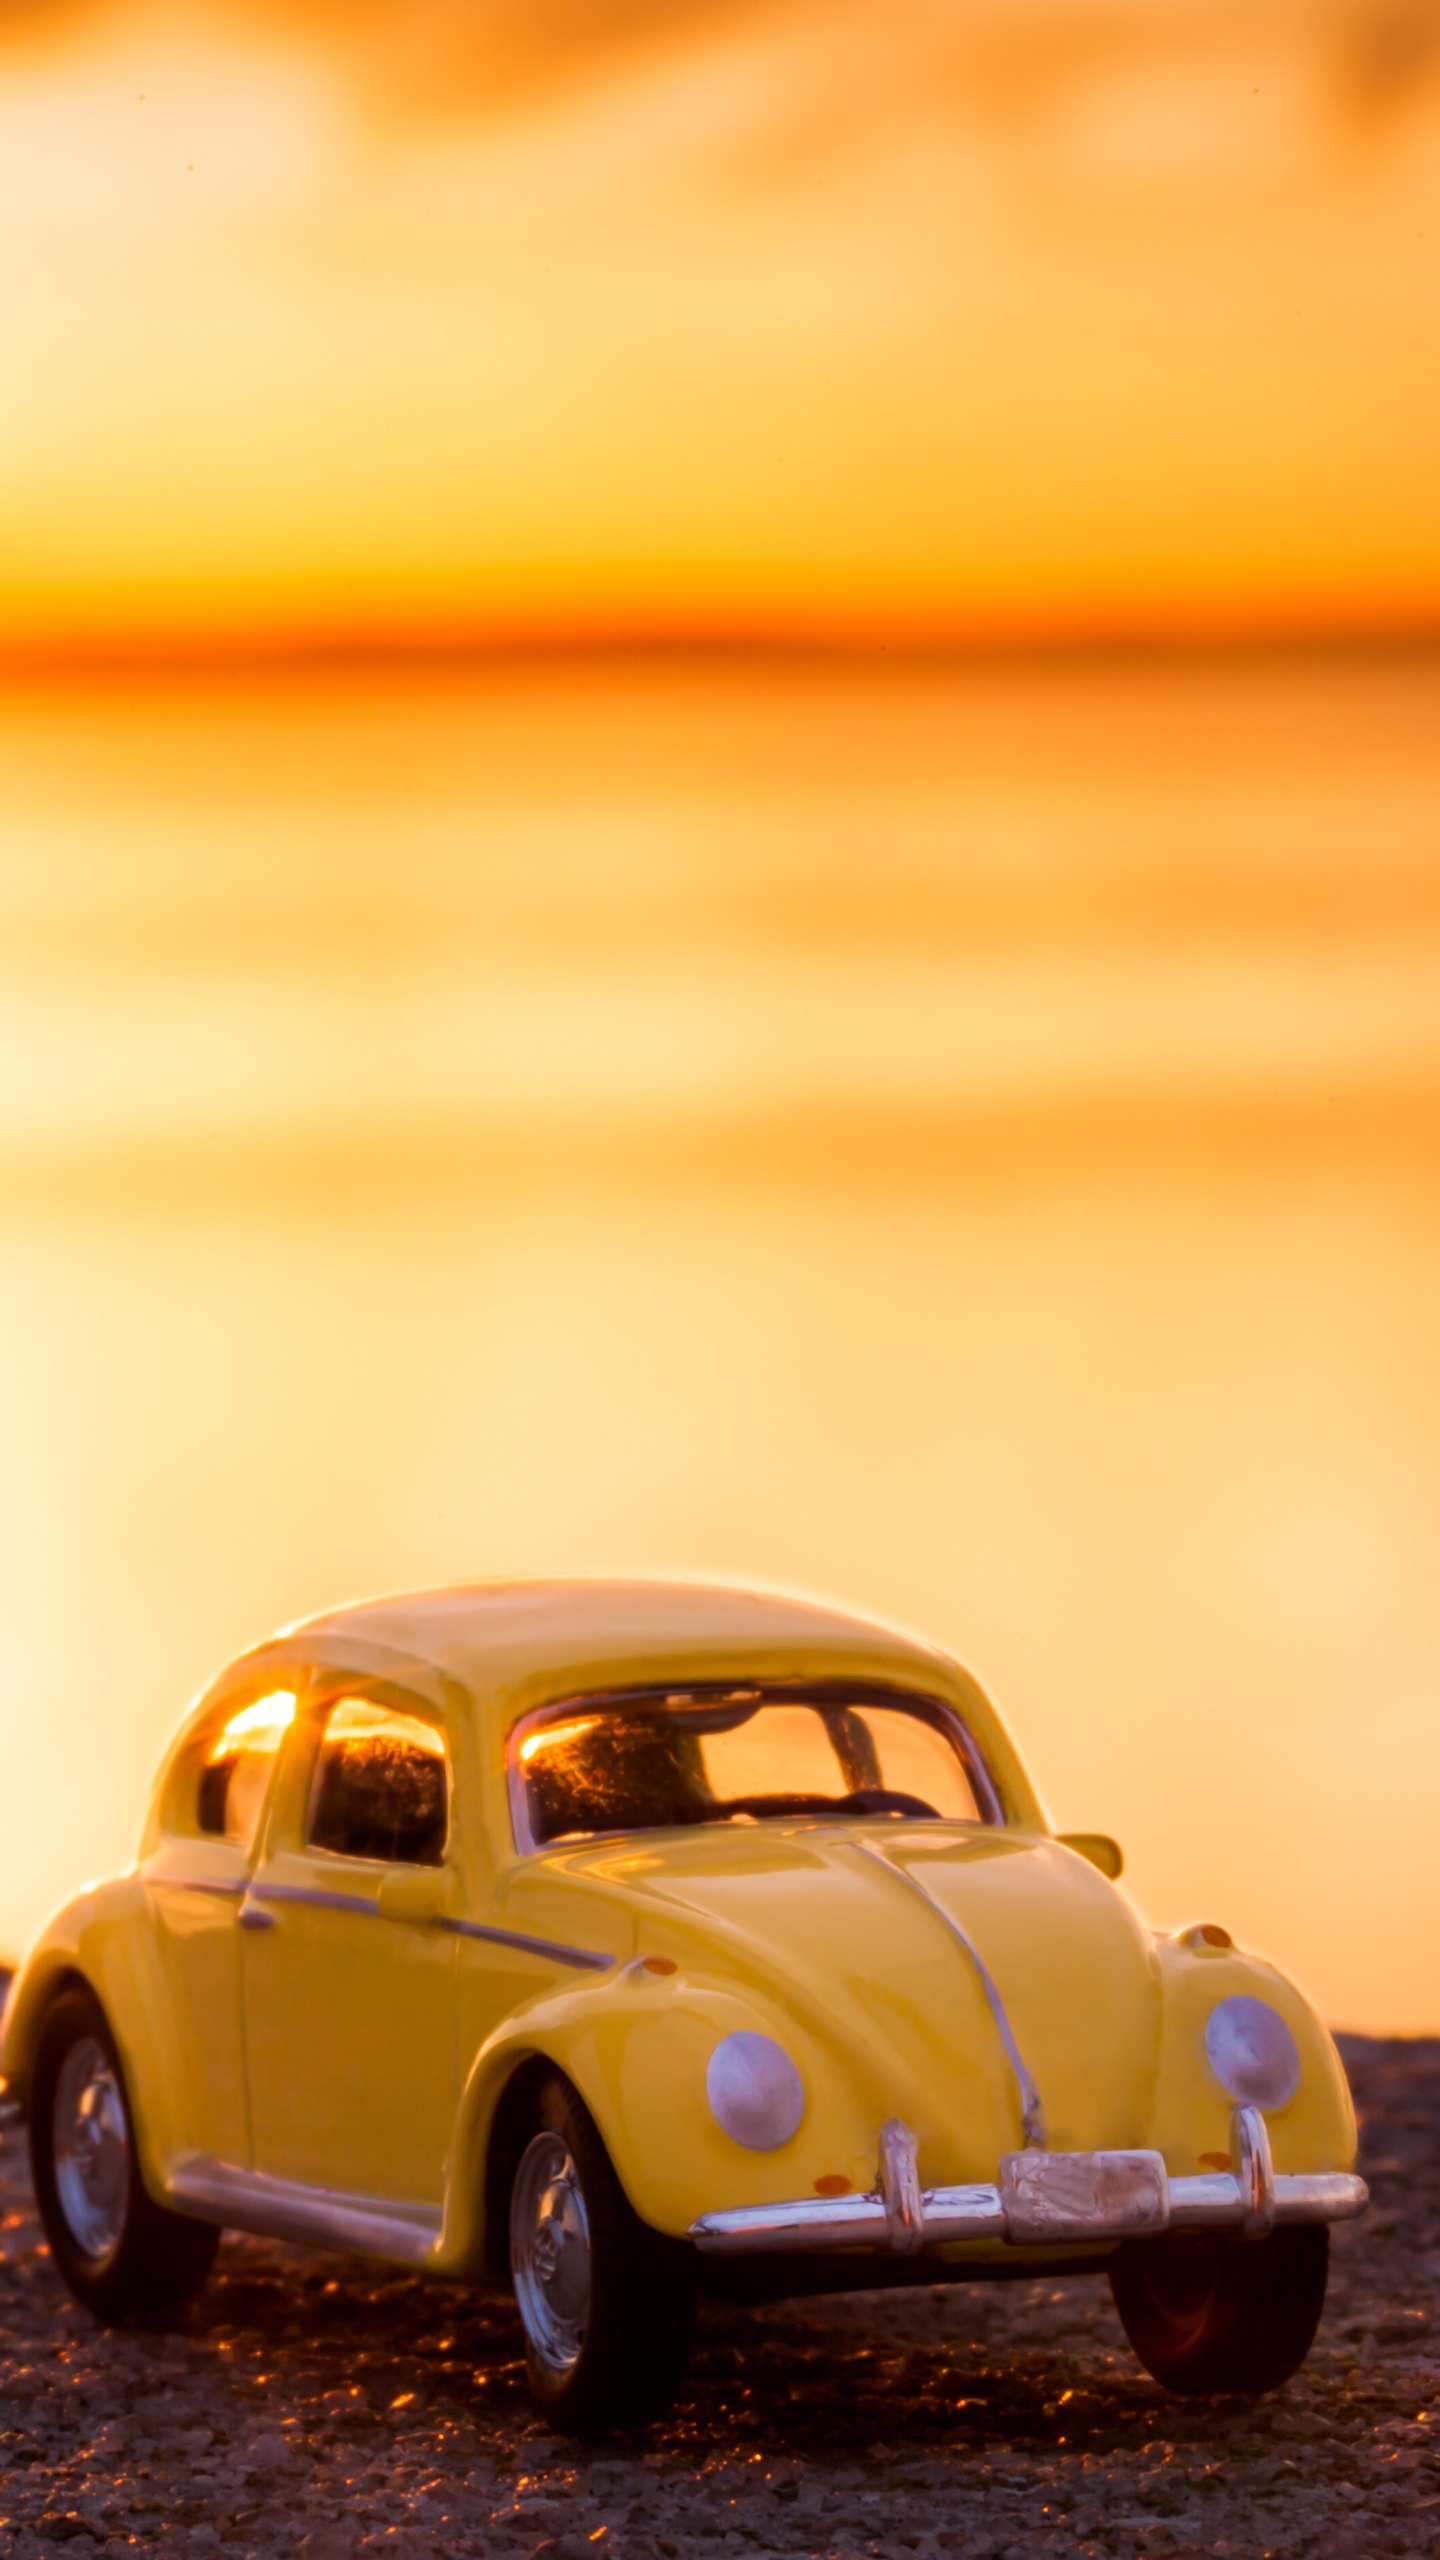 Yellow Volkswagen Beetle on Shore During Sunset. Wallpaper in 1440x2560 Resolution